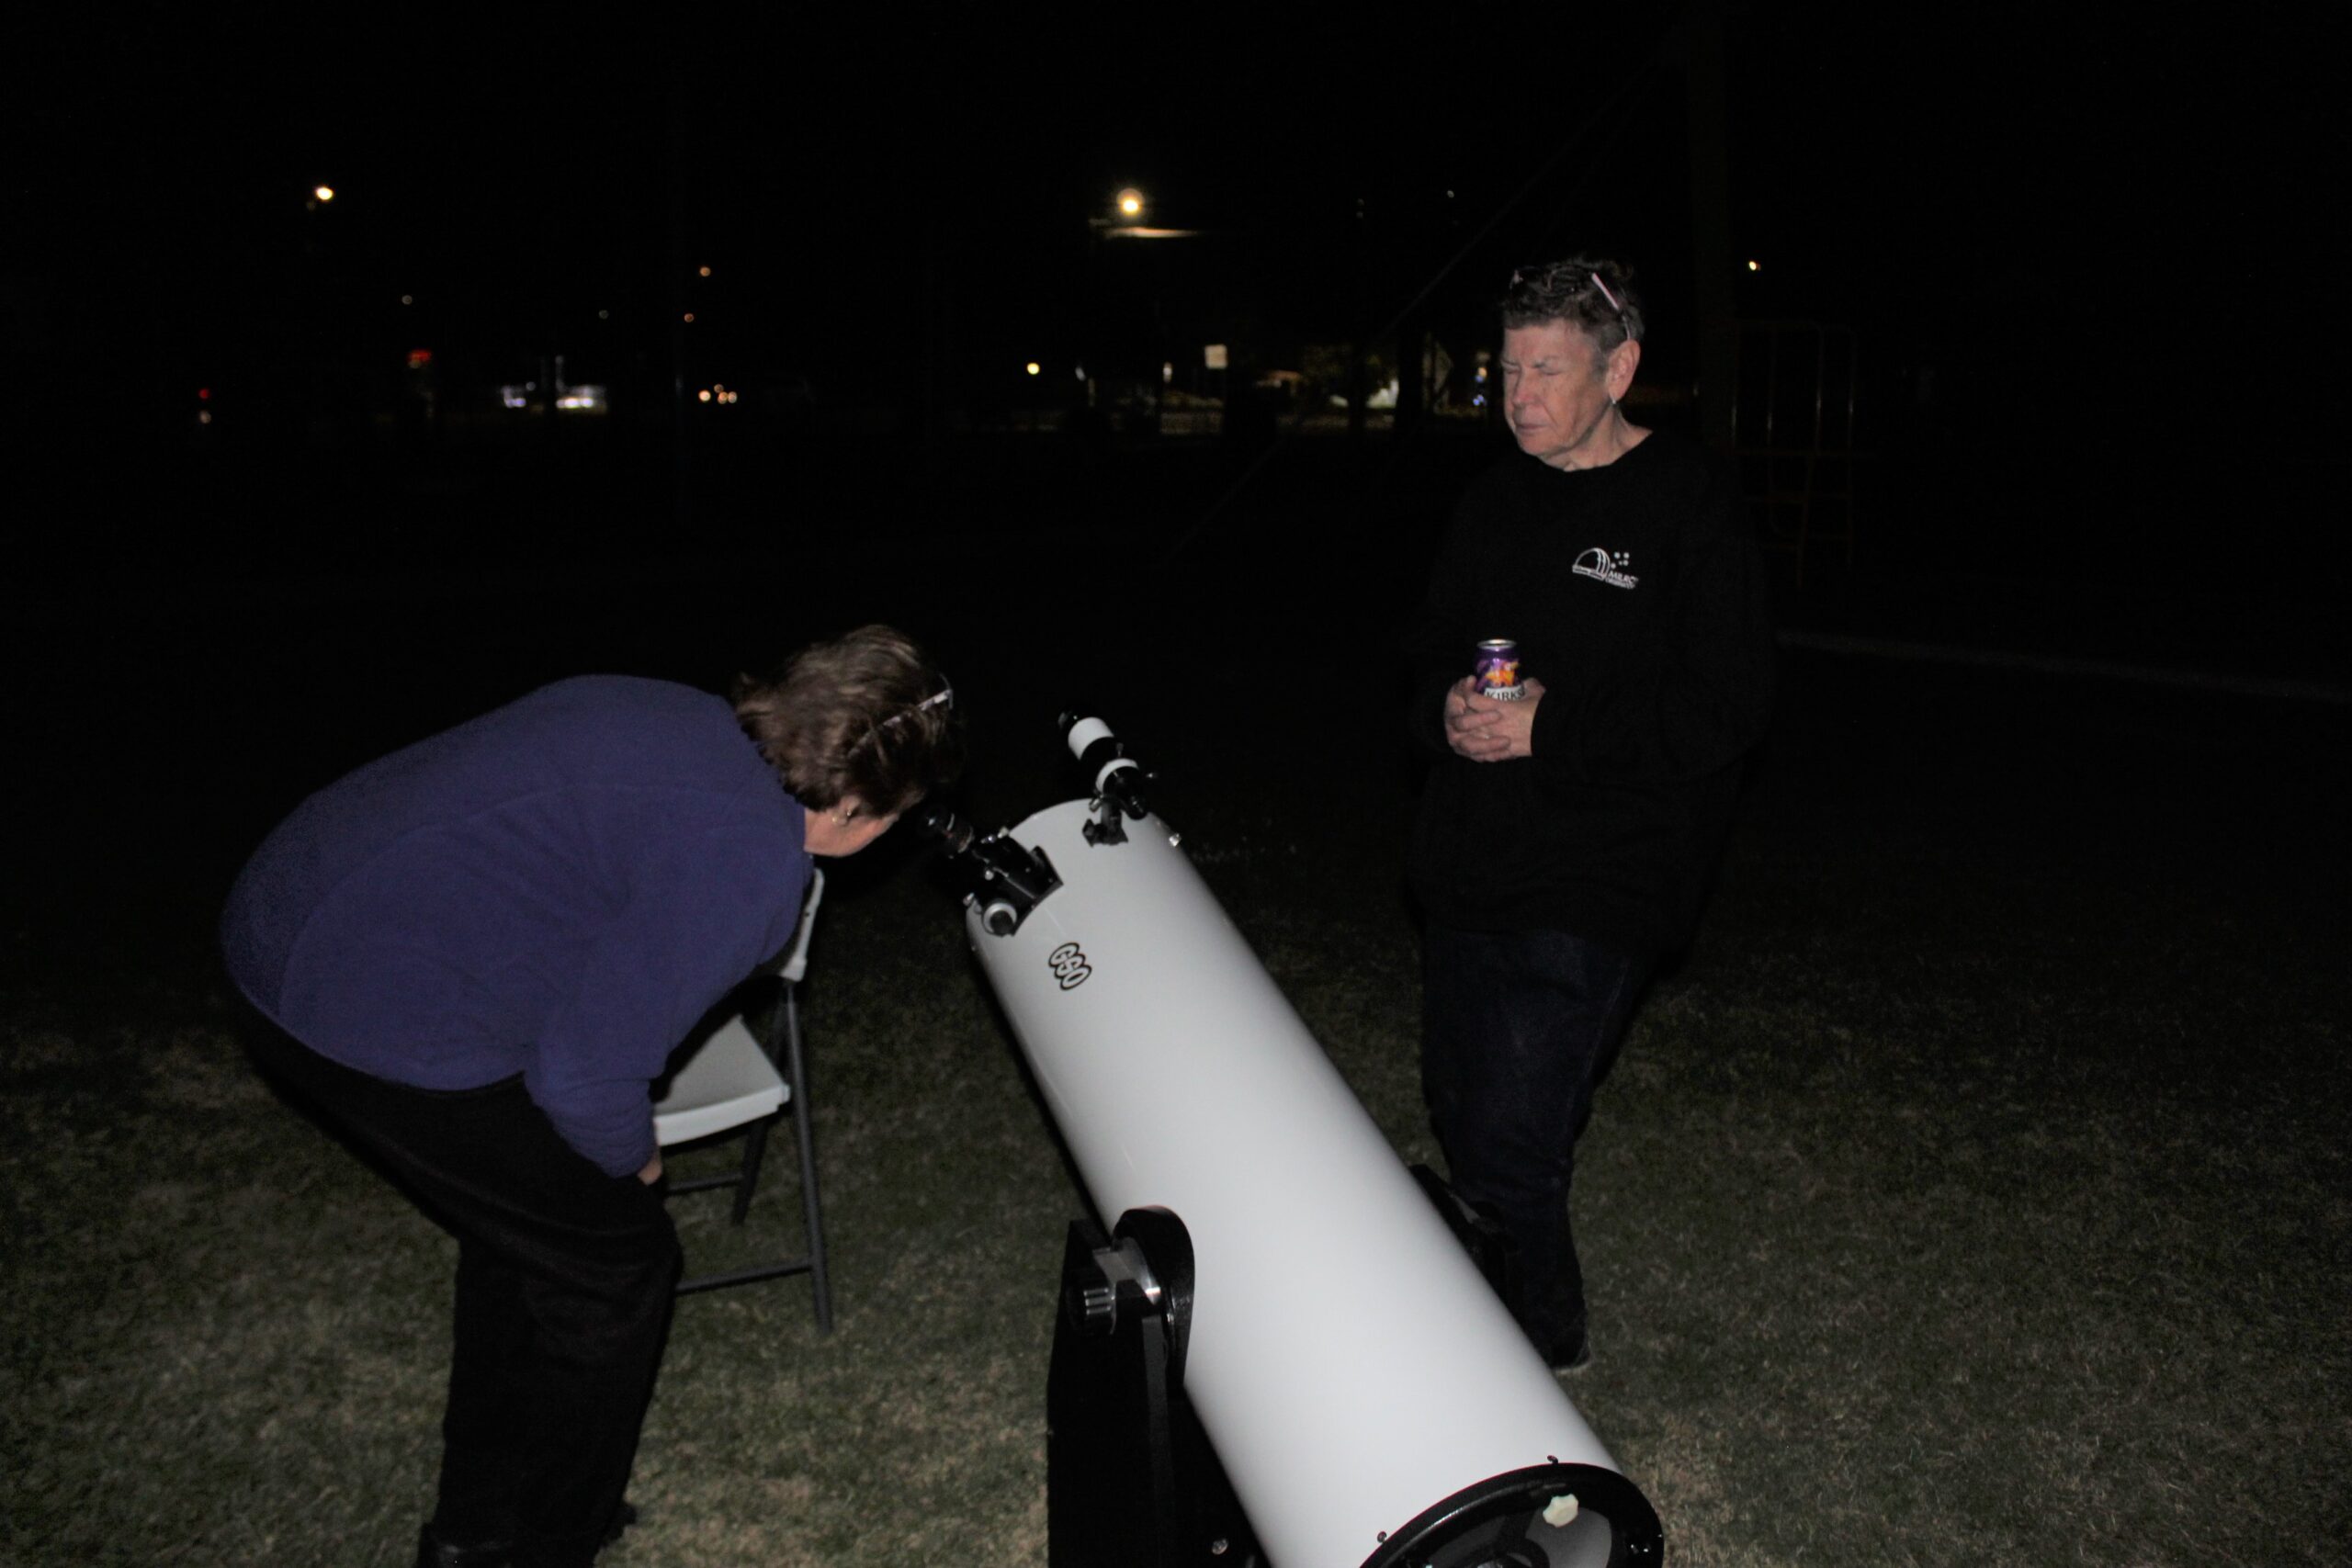 Aboriginal astronomy and stargazing in the park